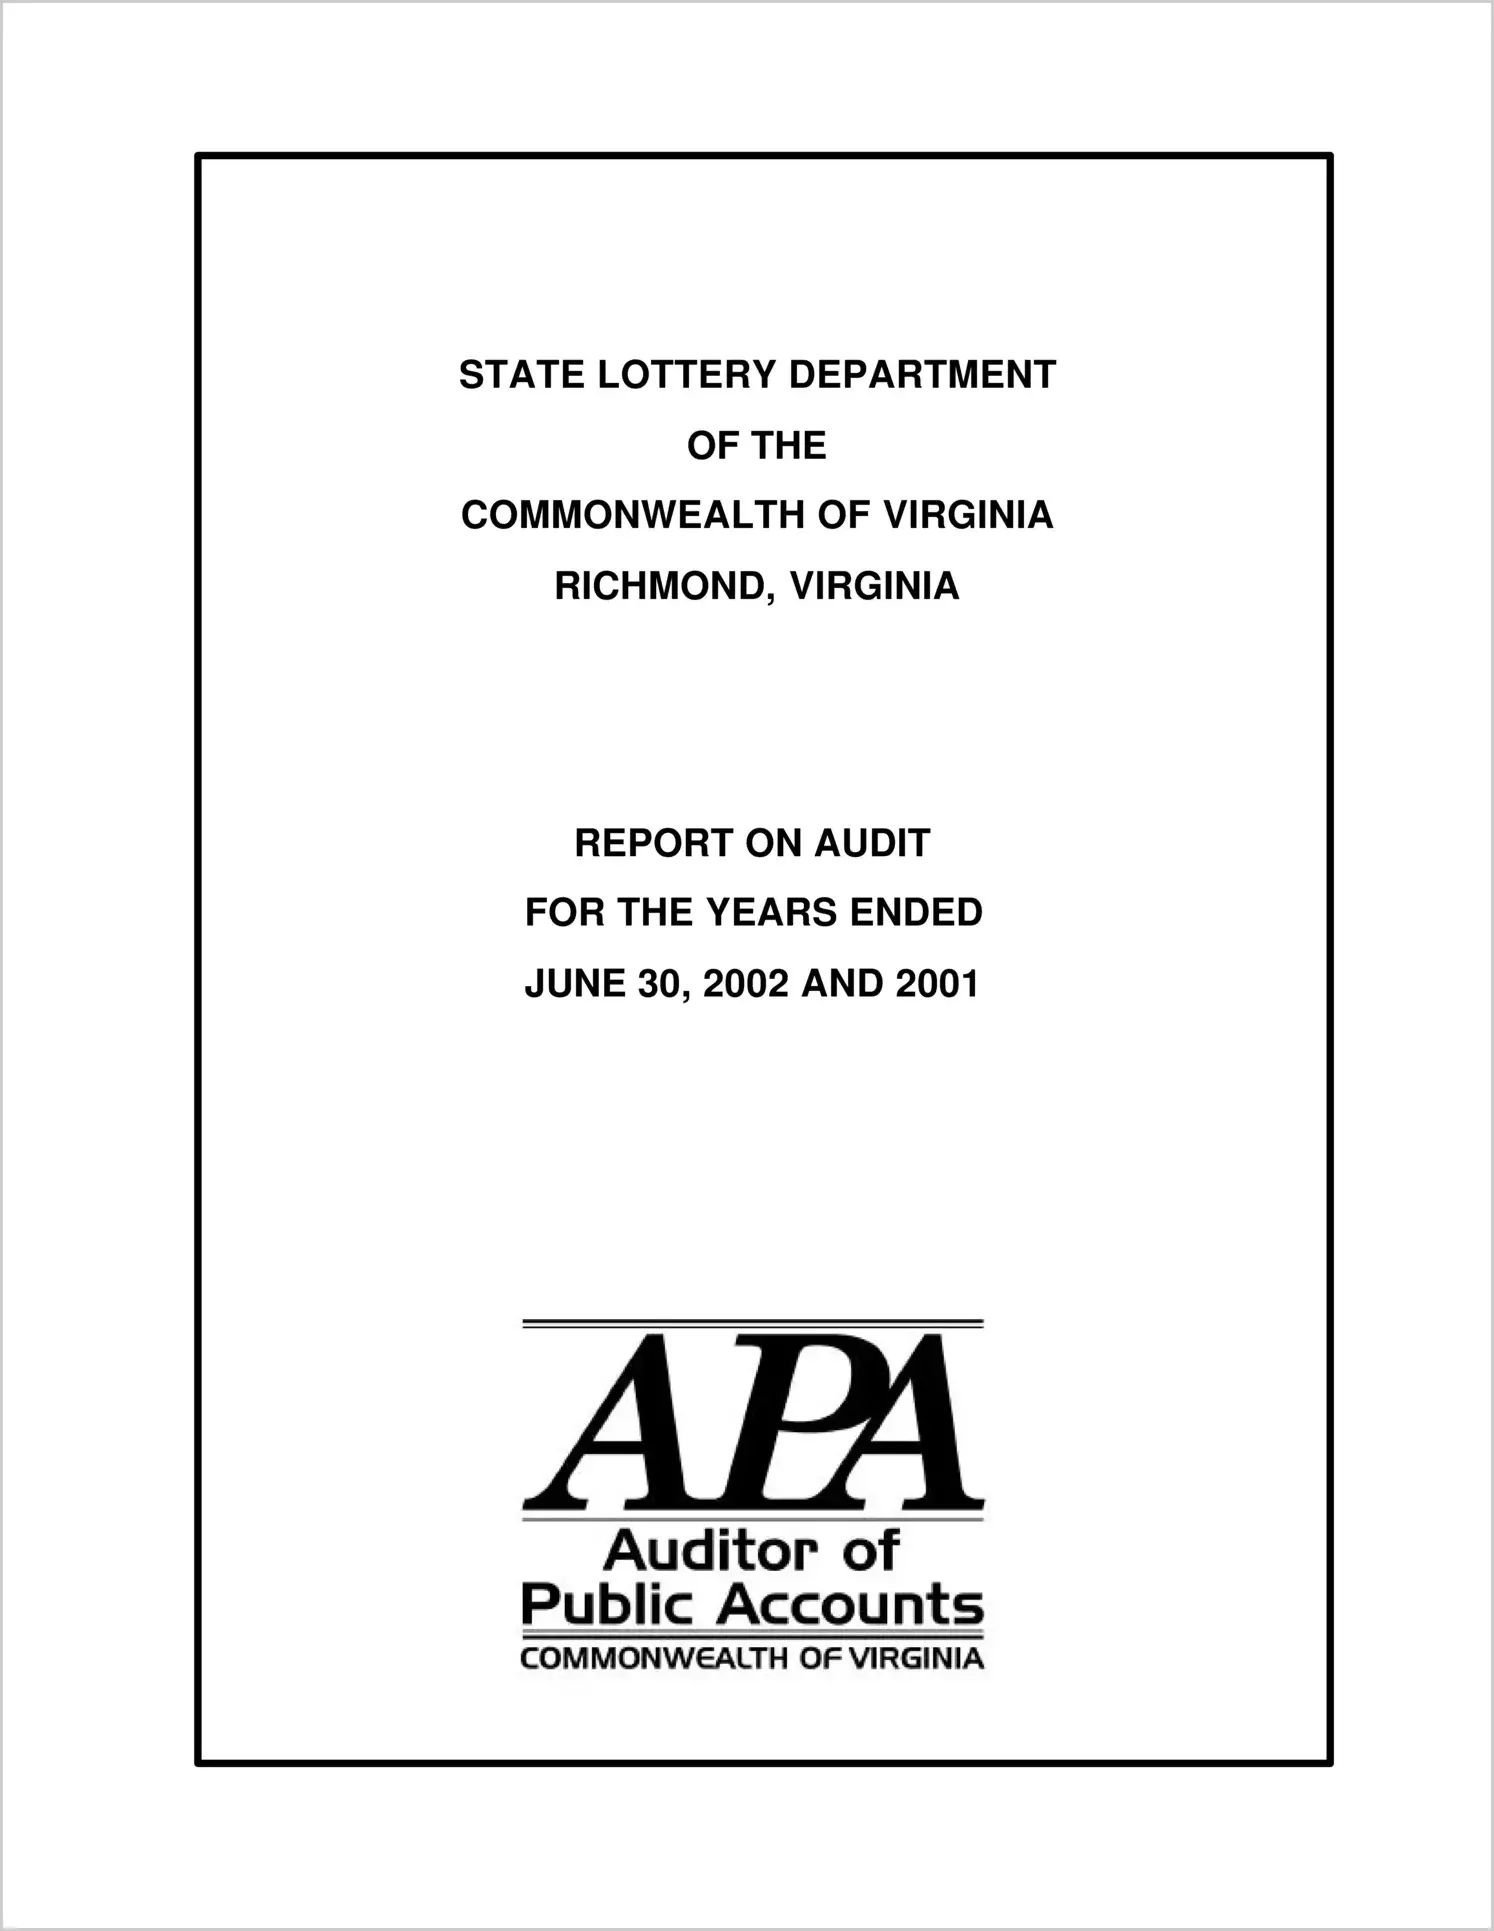 State Lottery Department for the years ended June 30, 2001 and June 30, 2002